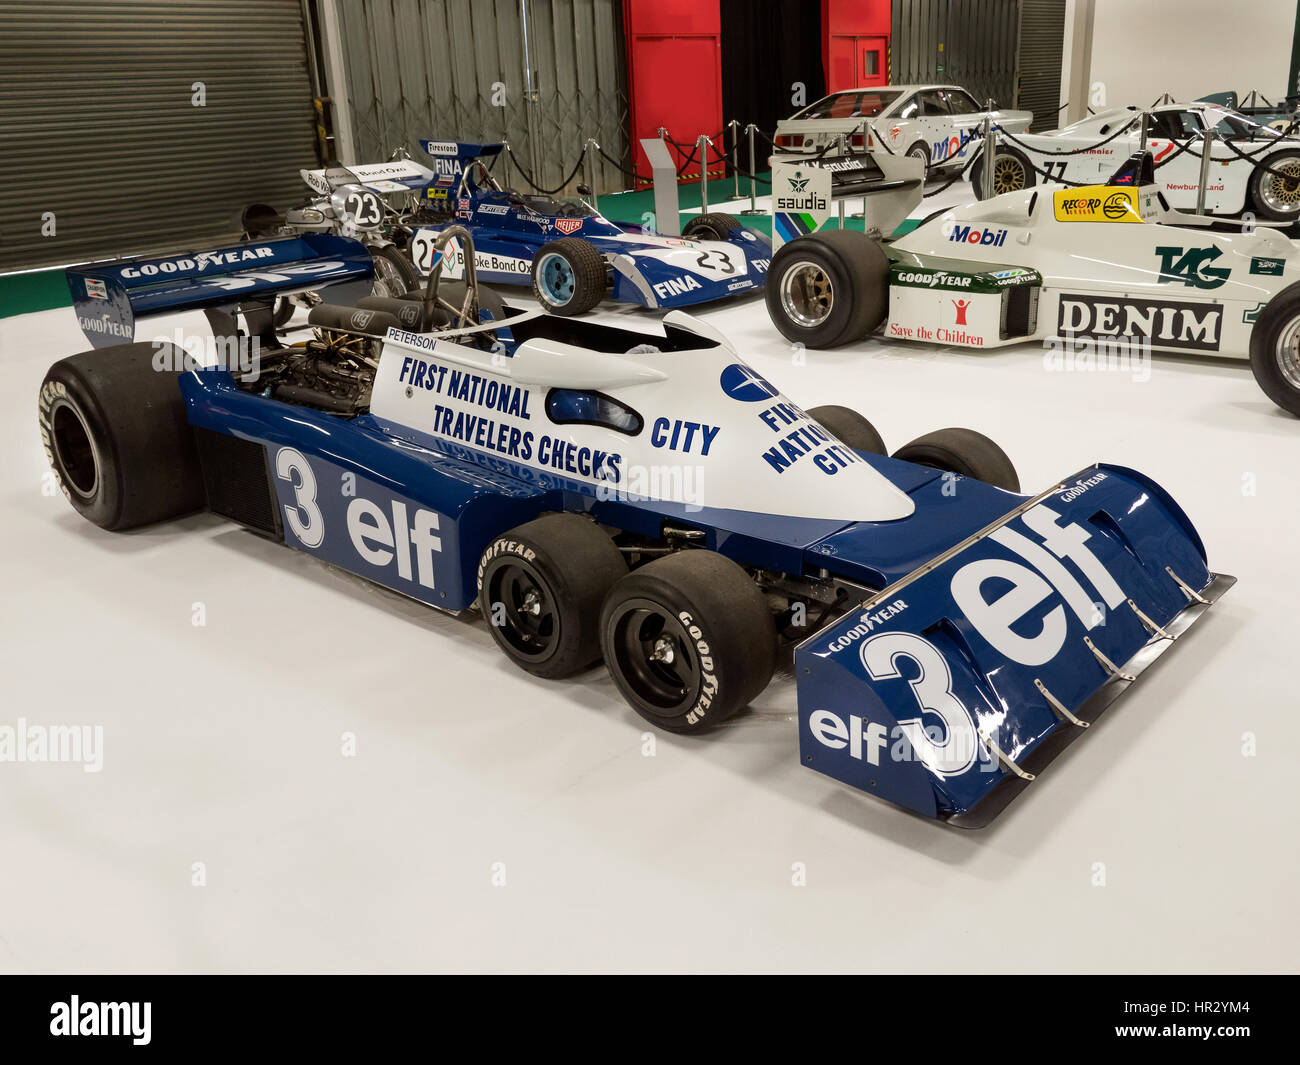 Ronnie Peterson Tyrrell F1 car at Race retro Stock Photo